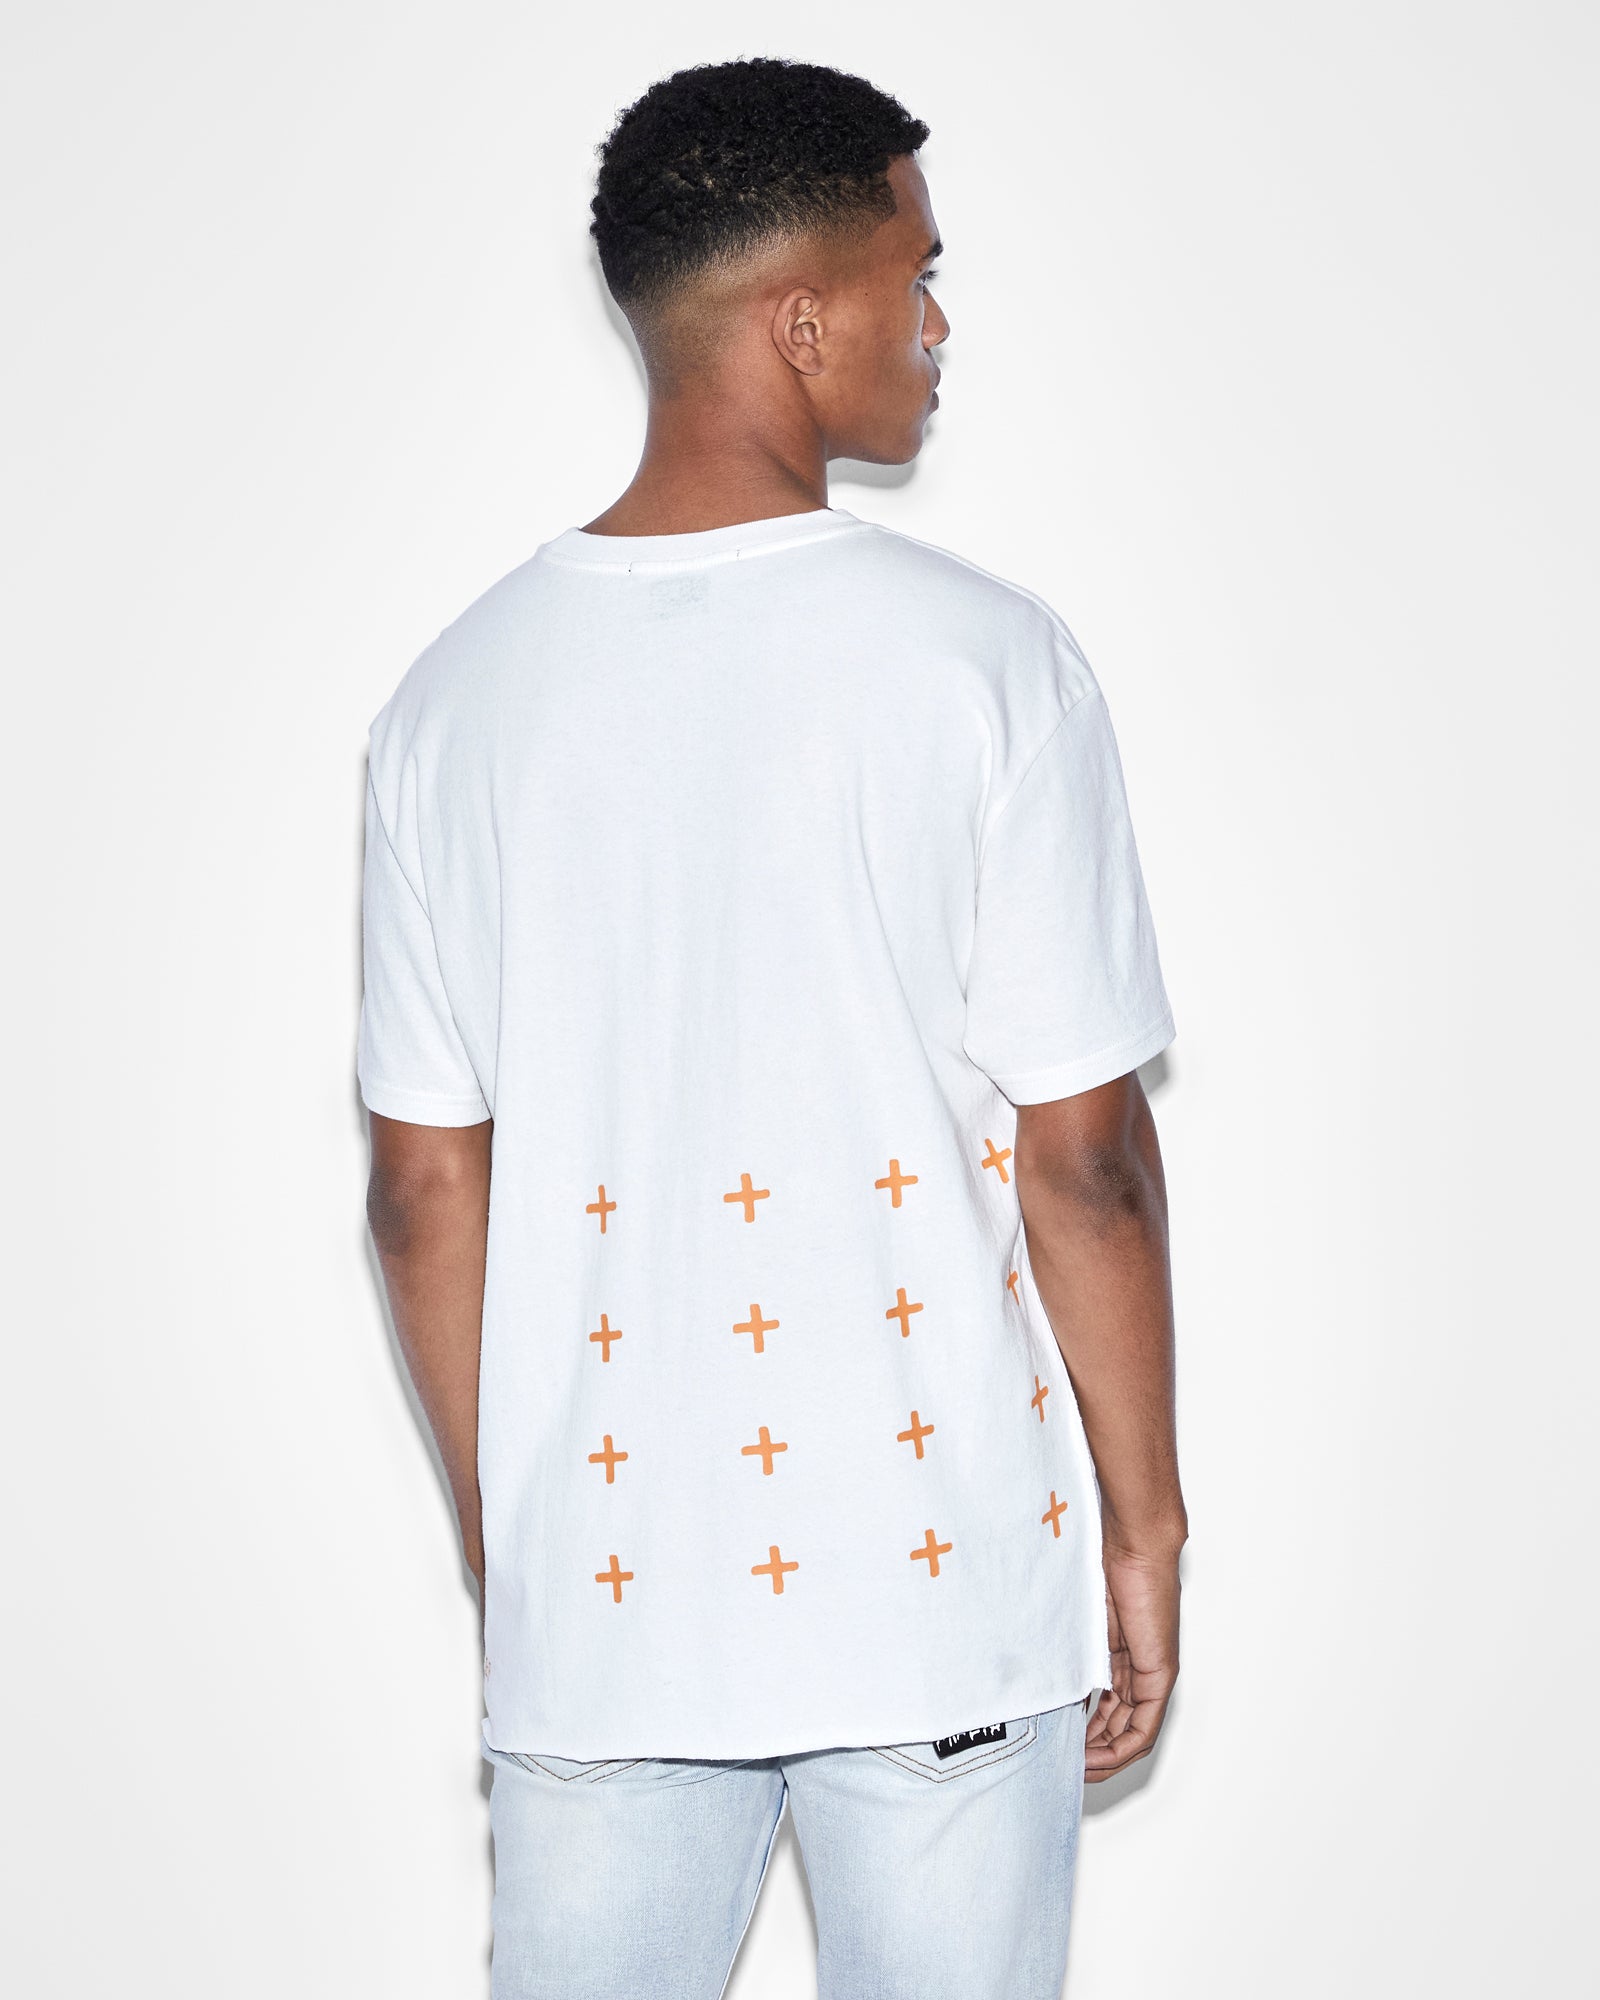 Men's White T-shirt With Dark Blue Star On The Front